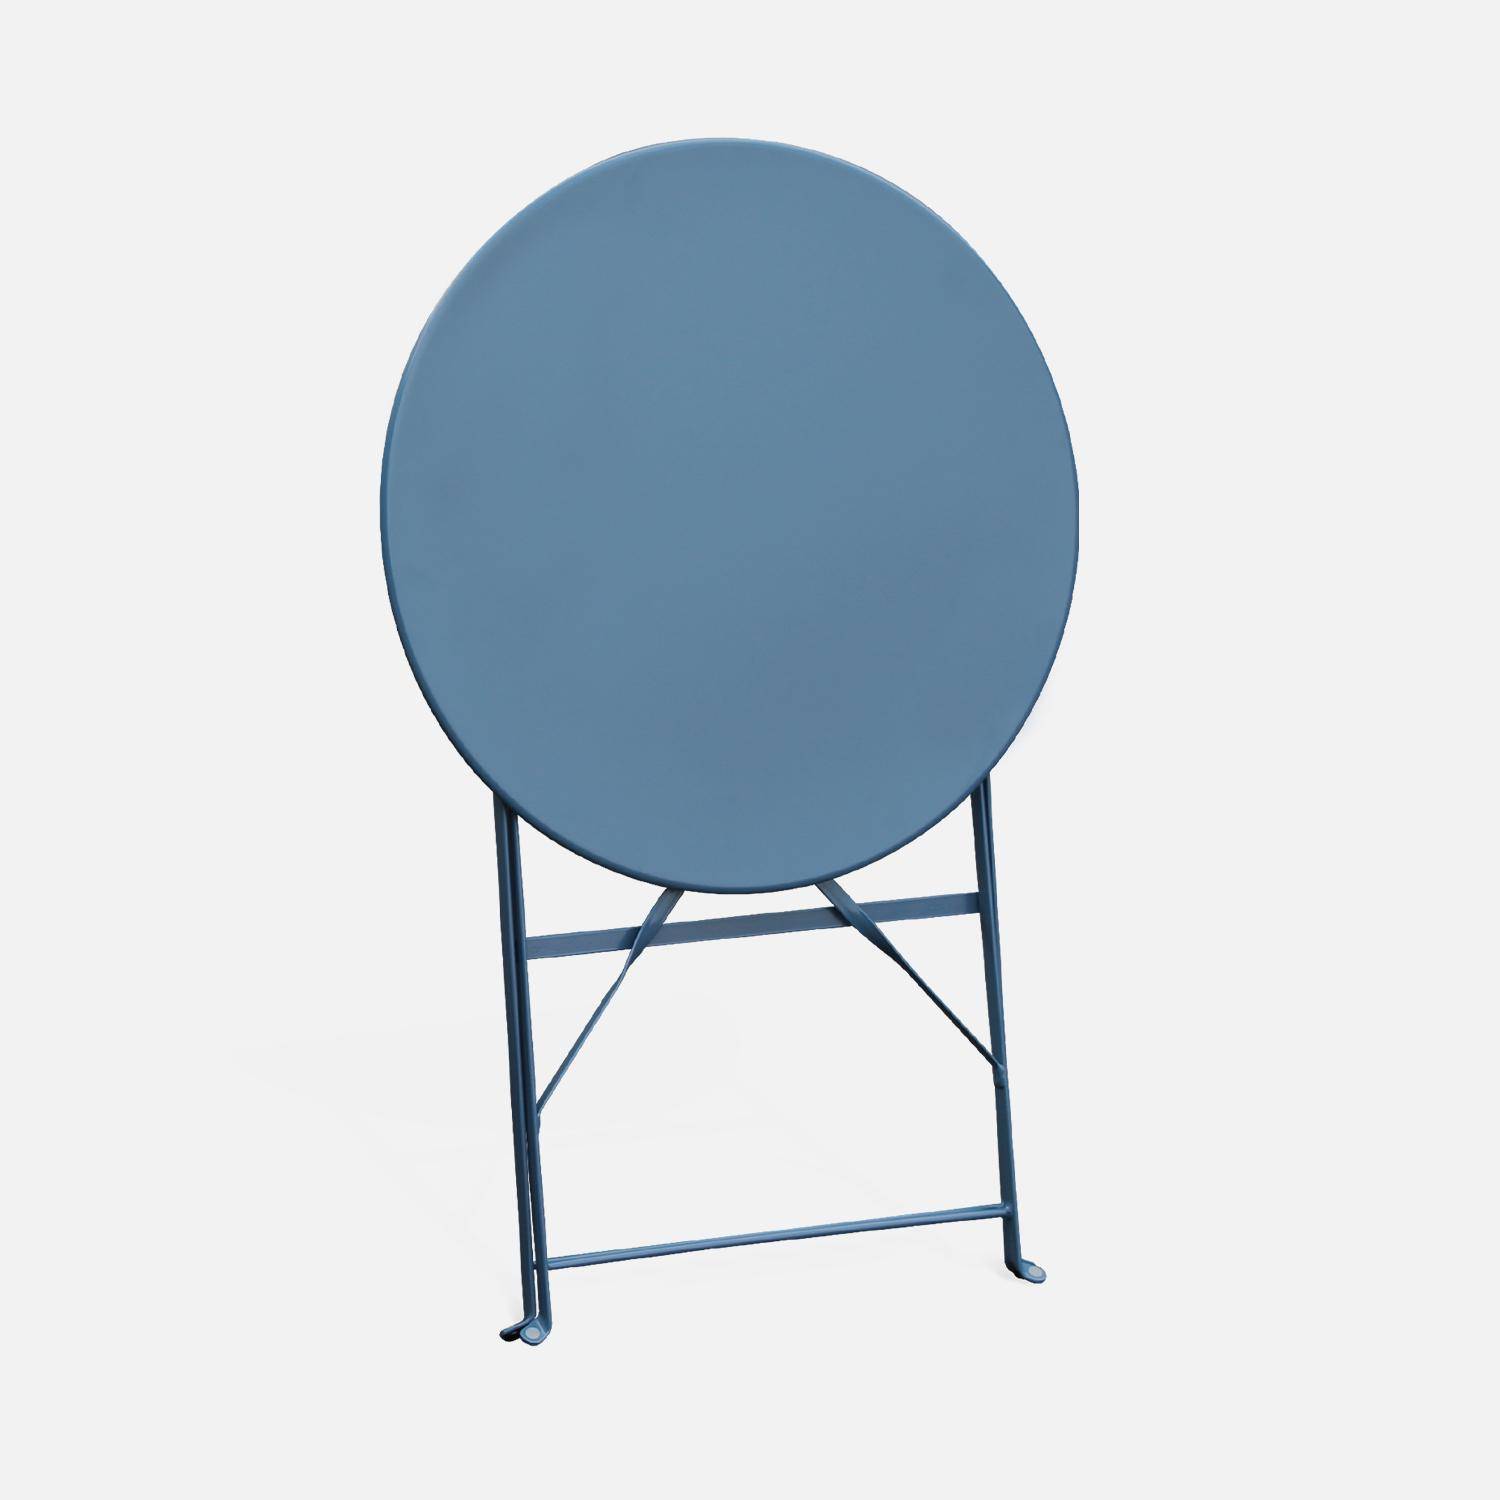 Foldable bistro garden table - Round Emilia grey blue - Round table Ø60cm, thermo-lacquered steel Photo5